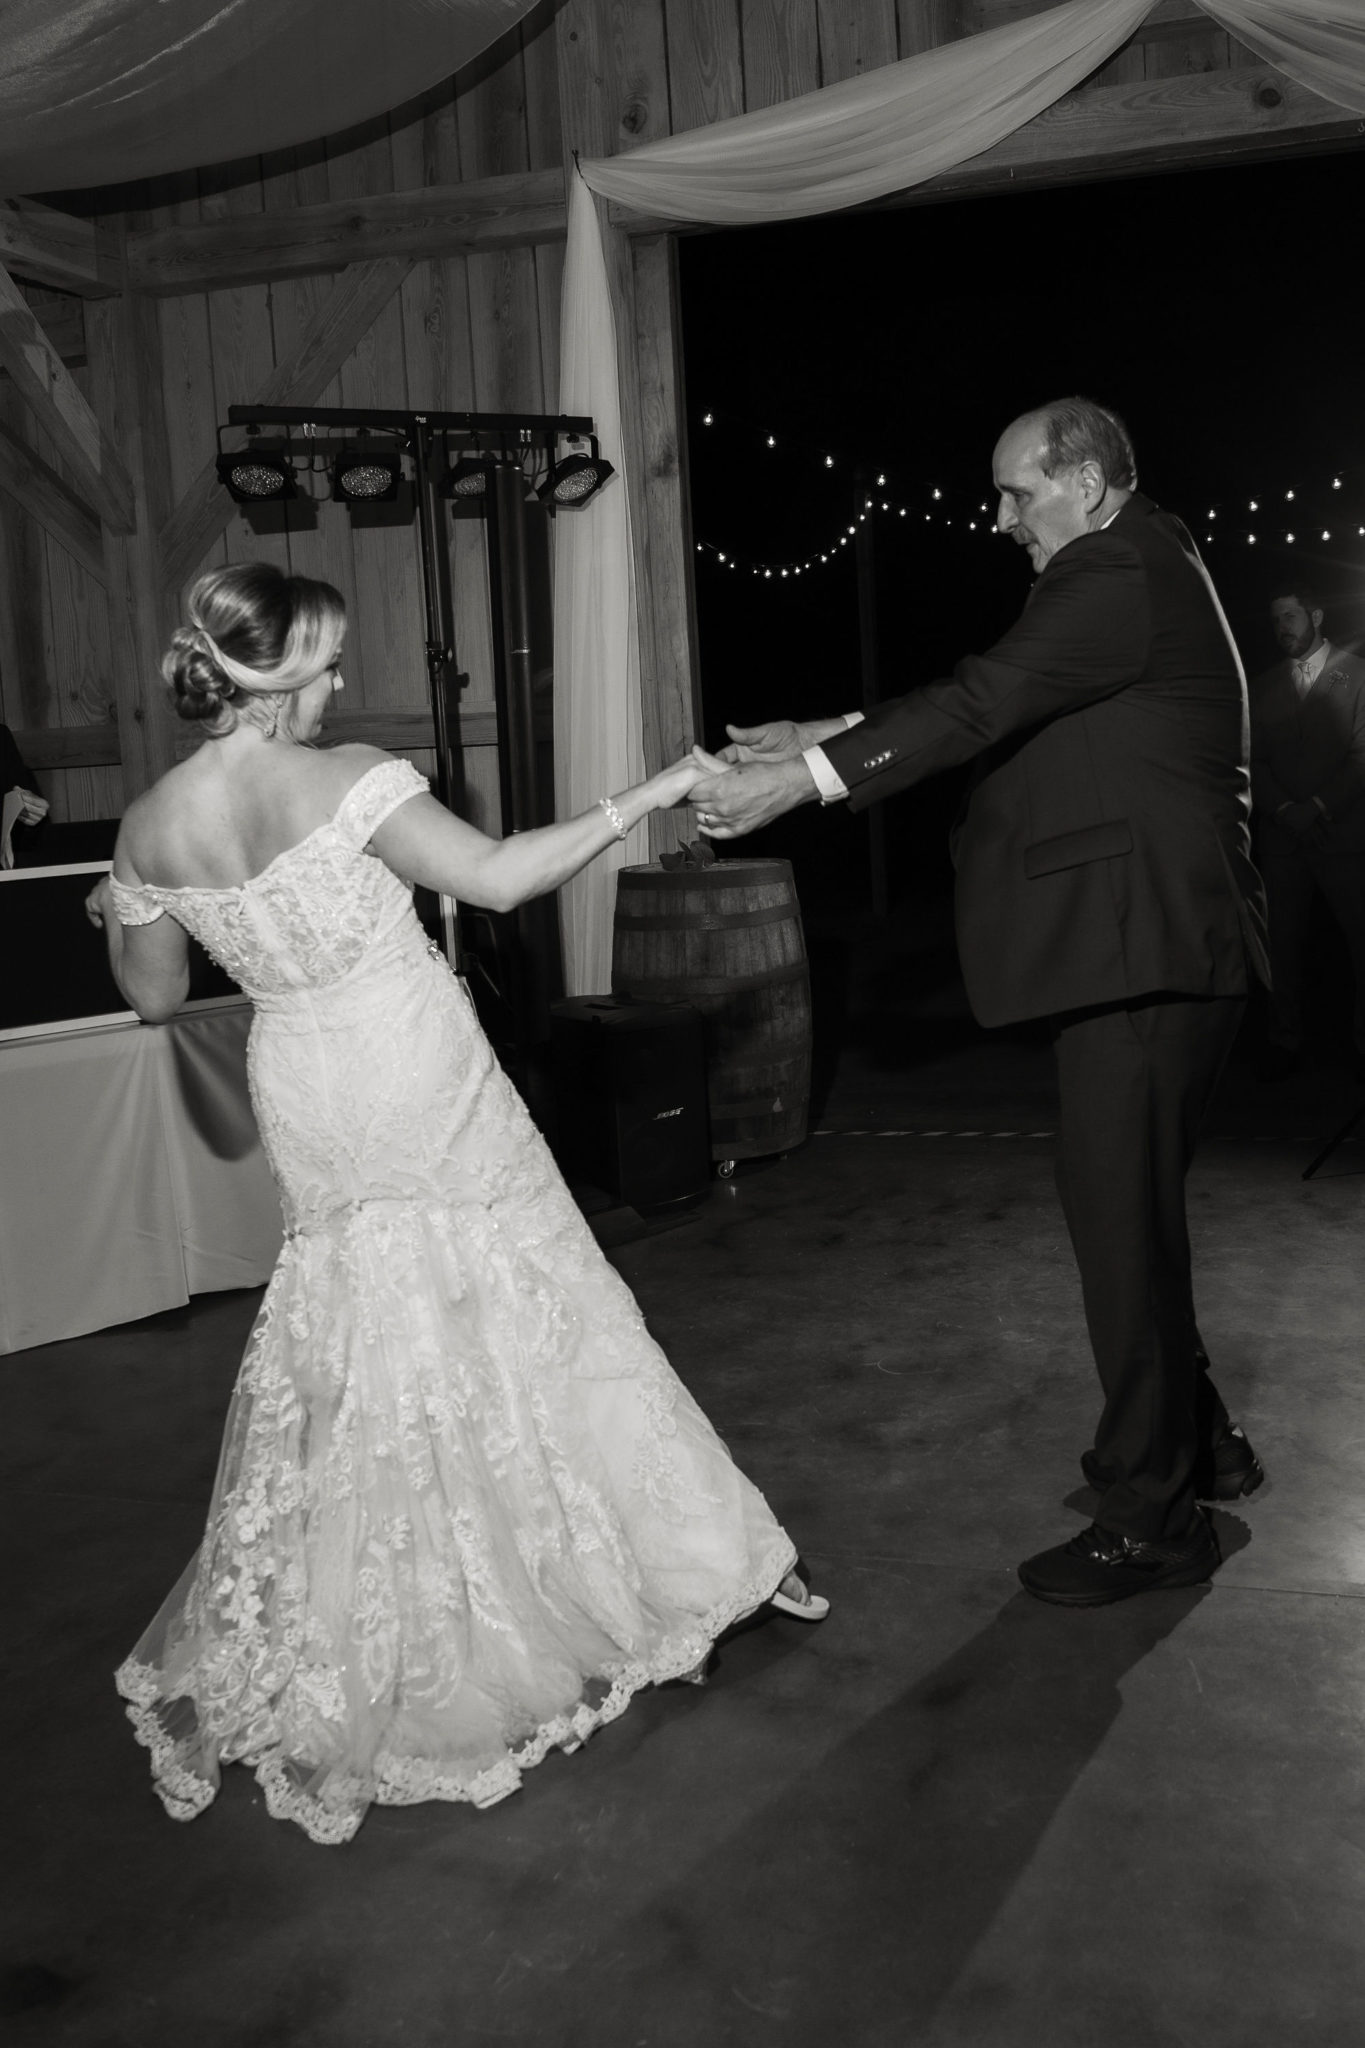 The father-daughter dance. 